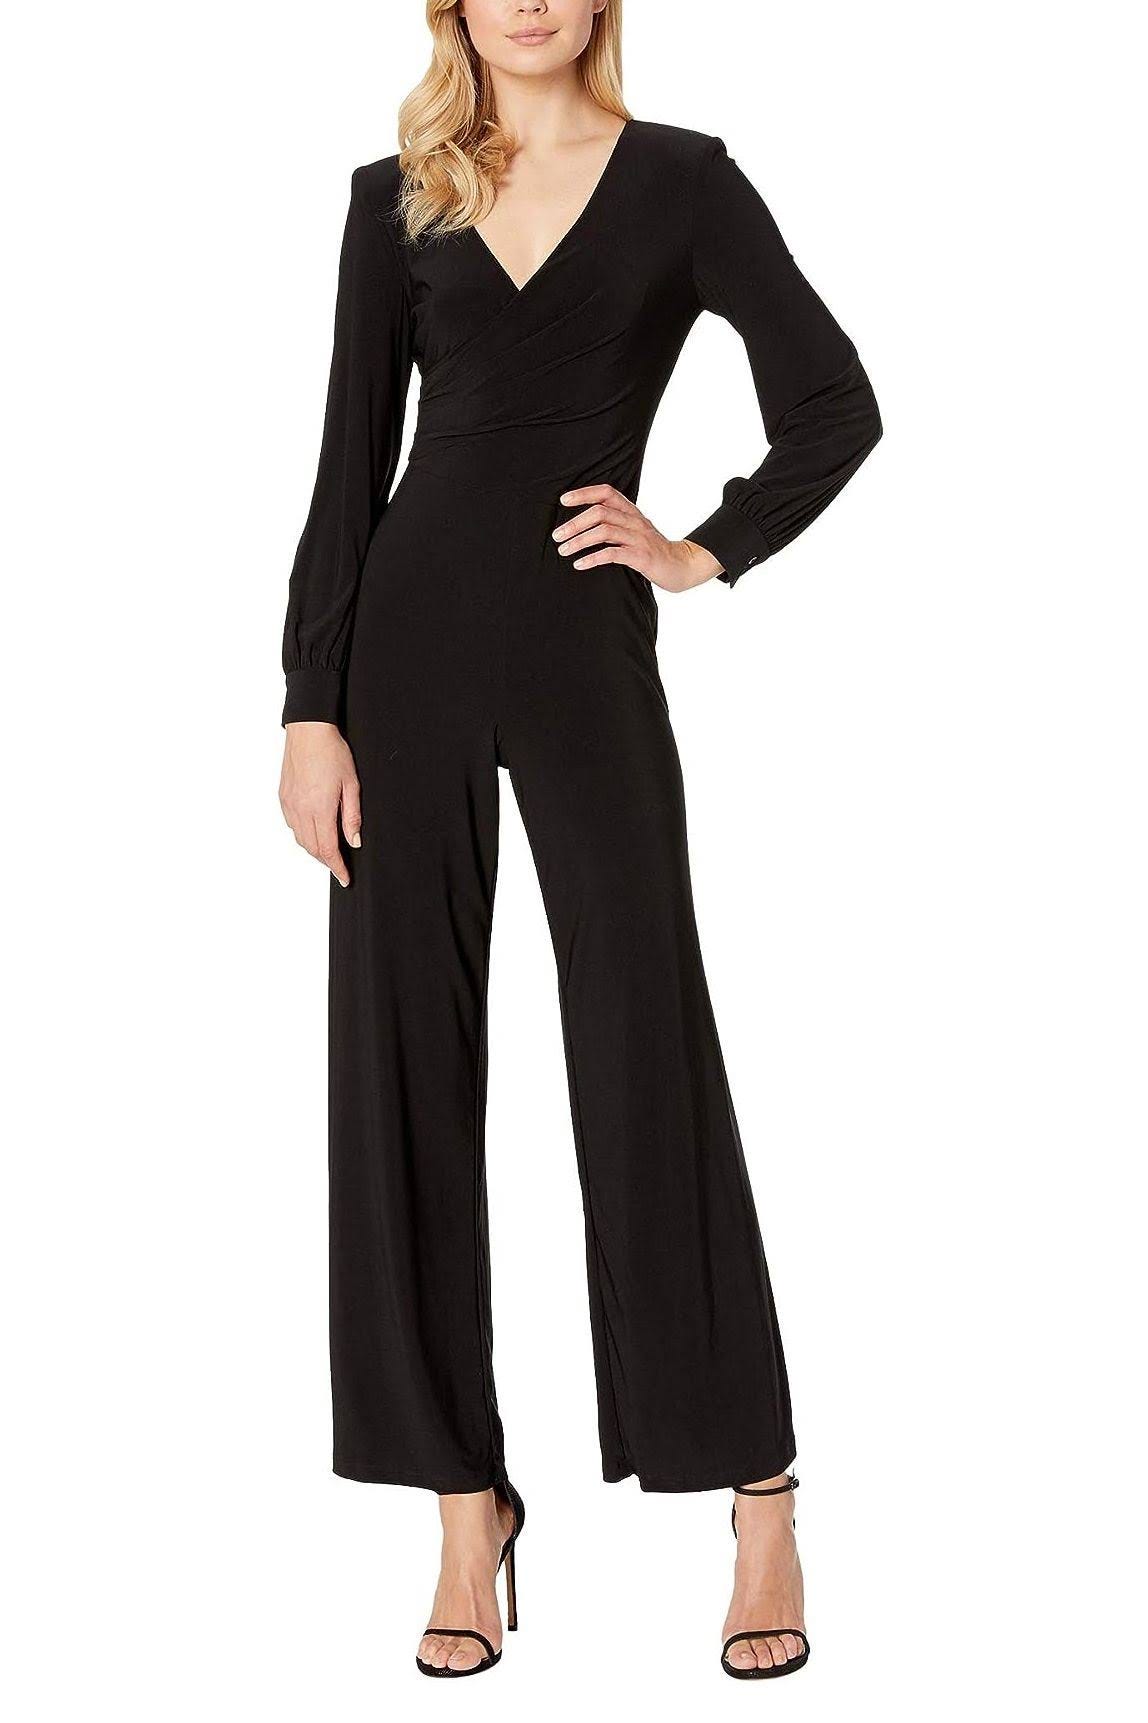 Black Long Sleeve Jumpsuit with Wrap-Around Fit by Adrianna Papell | Image